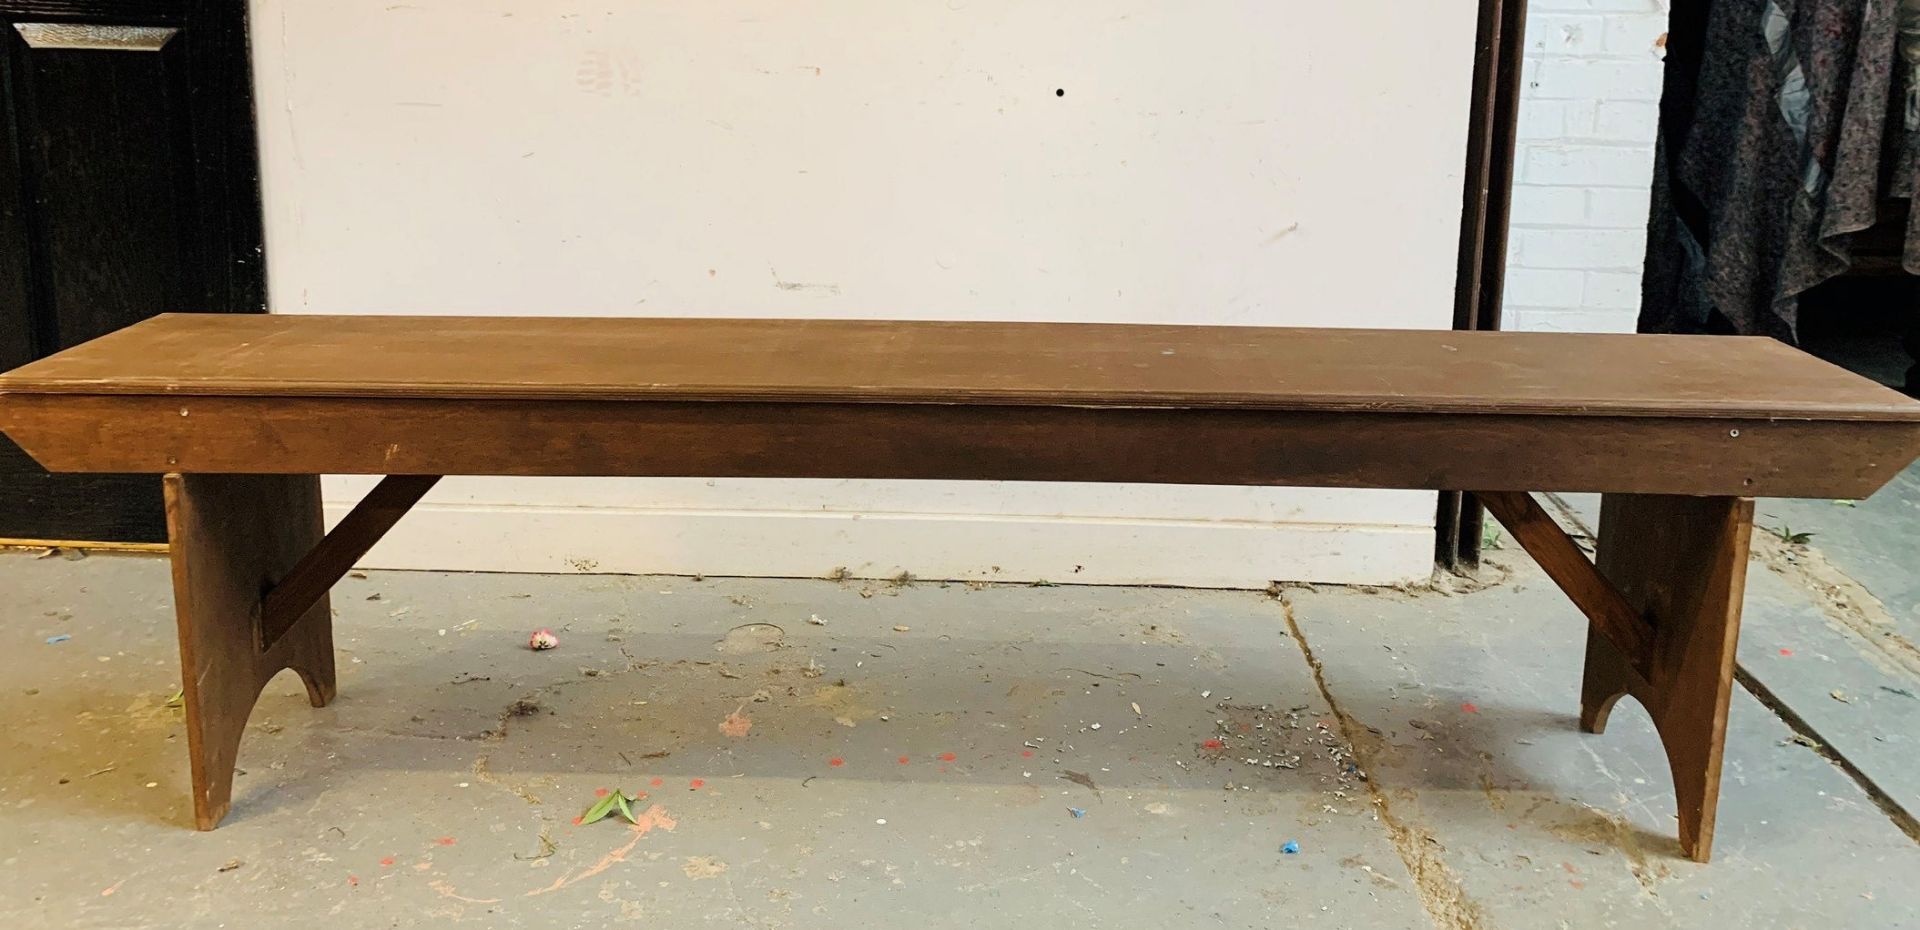 5 x 1.8m Wooden Benches - Dimensions: 183x47x30cm - Ref: Lot 49 - CL548 - Location: Near Oadby,